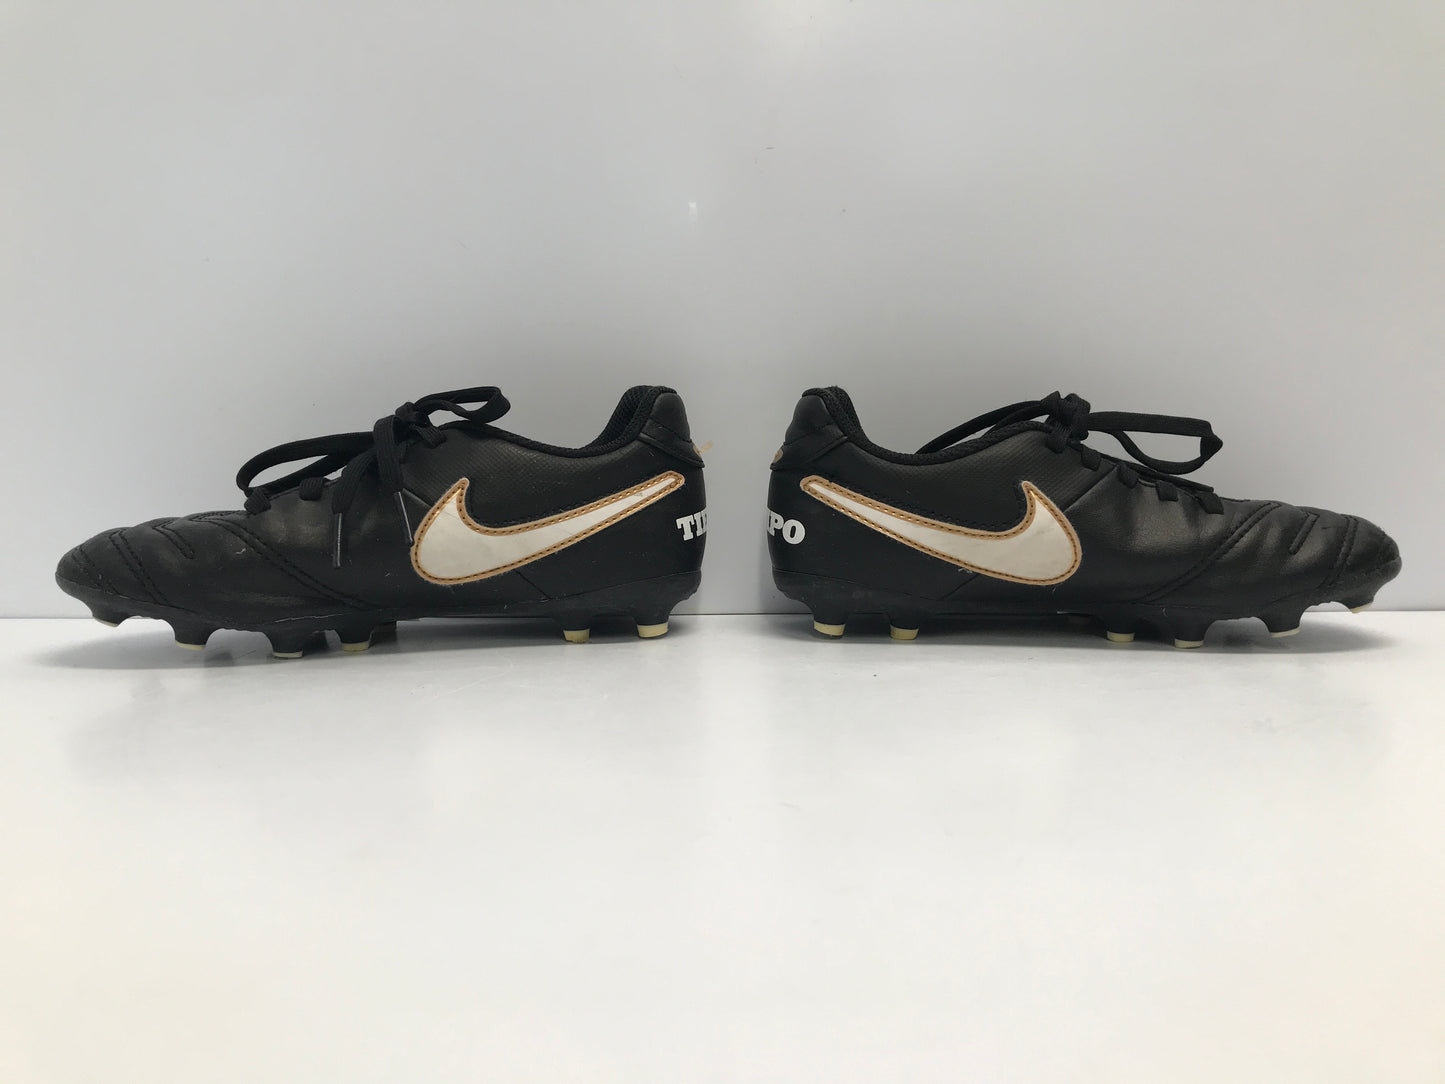 Soccer Shoes Cleats Child Size 1 Nike Tiempo Black White Gold